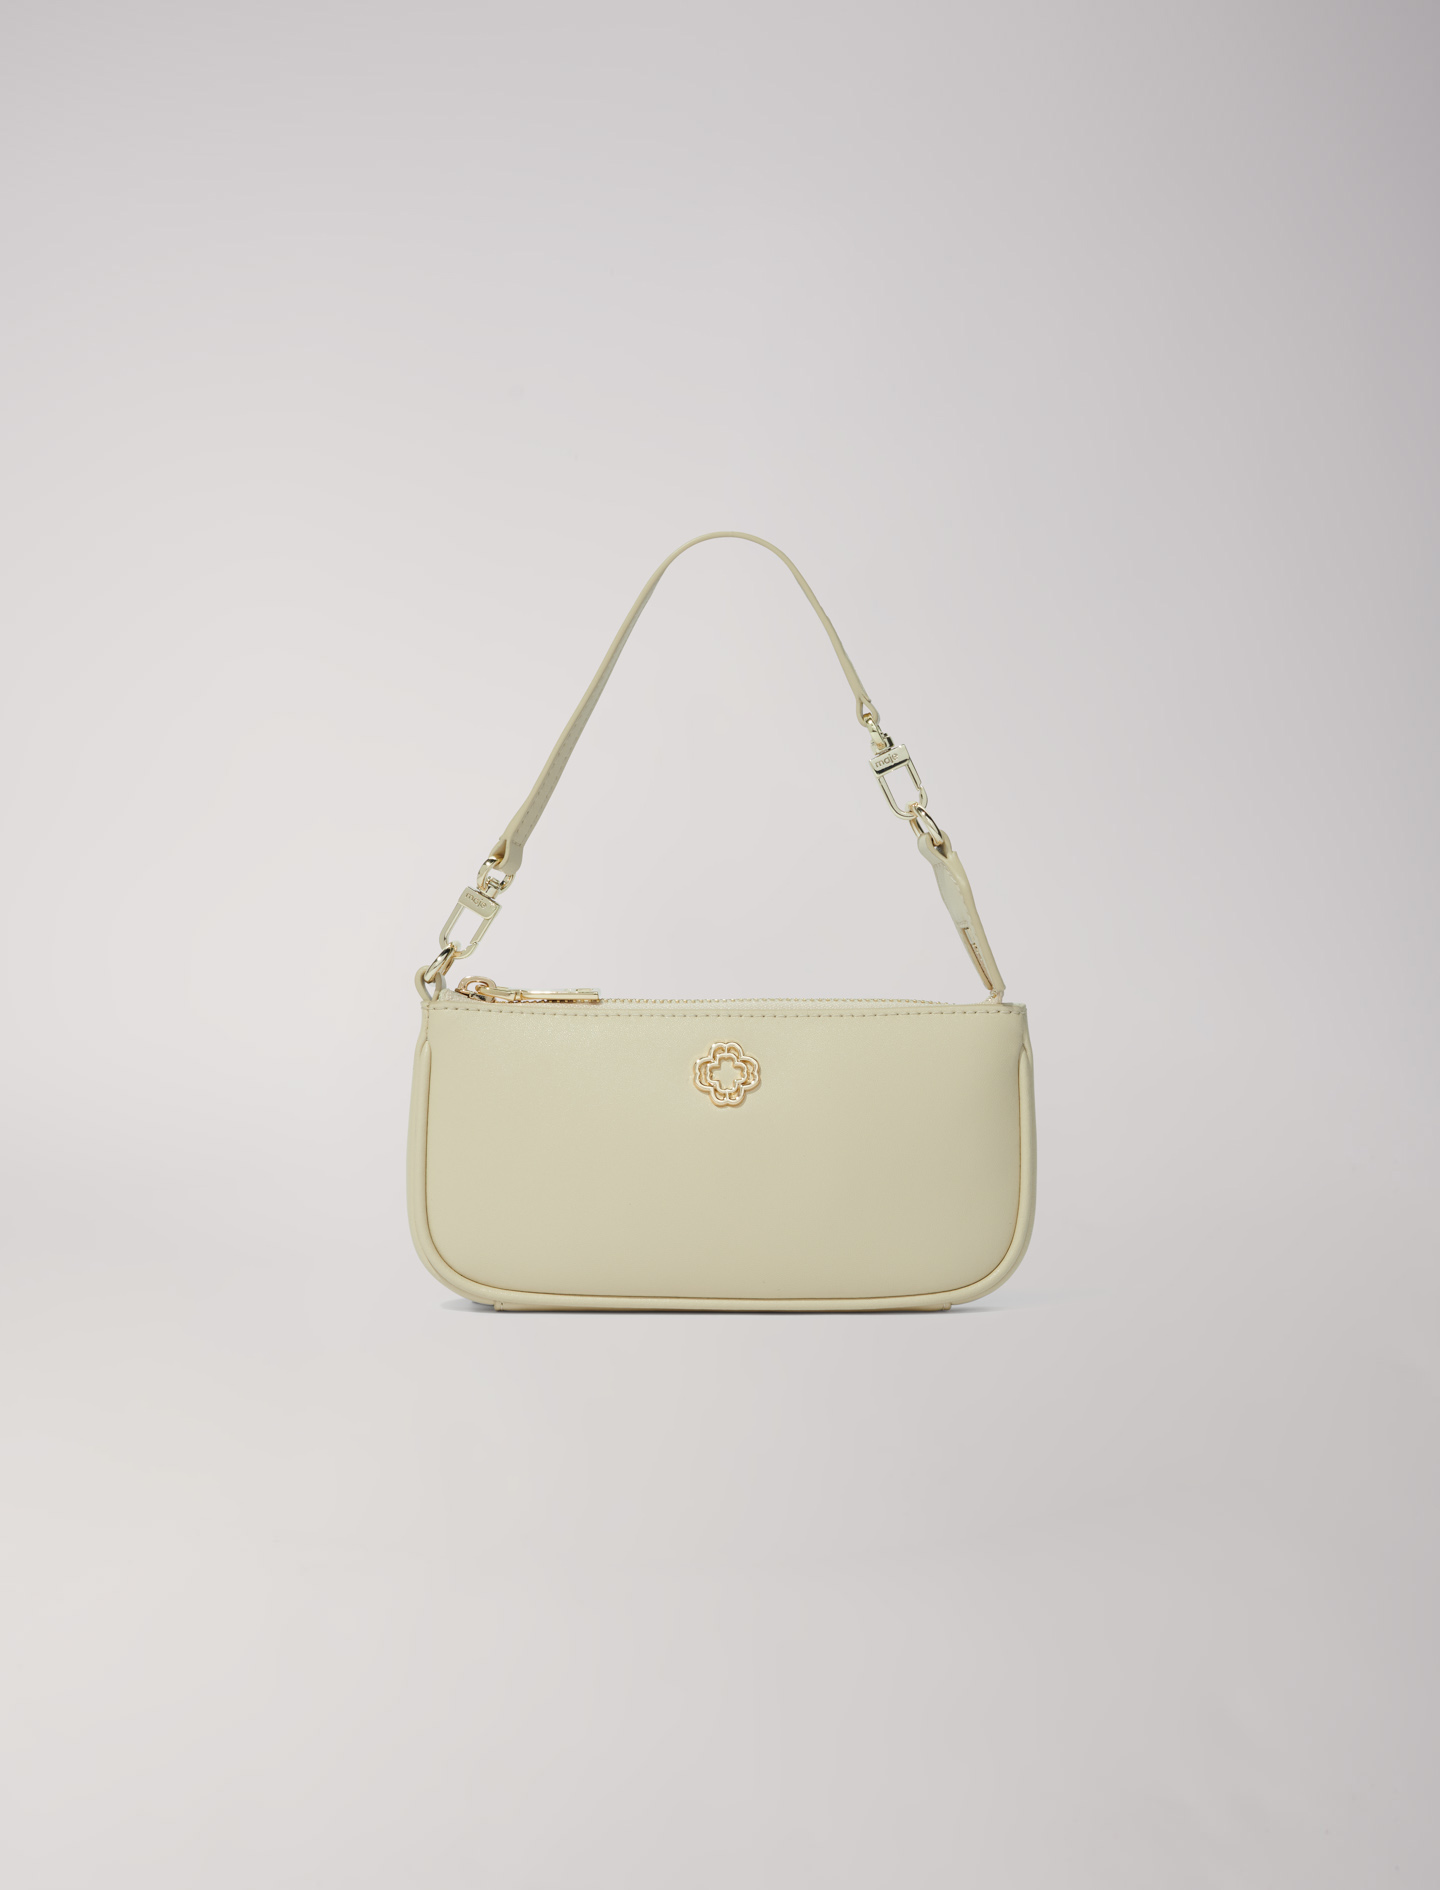 Mixte's polyester Accessories: Small leather clutch bag, size Mixte-Small leather goods-OS (ONE SIZE), in color Ecru / Beige